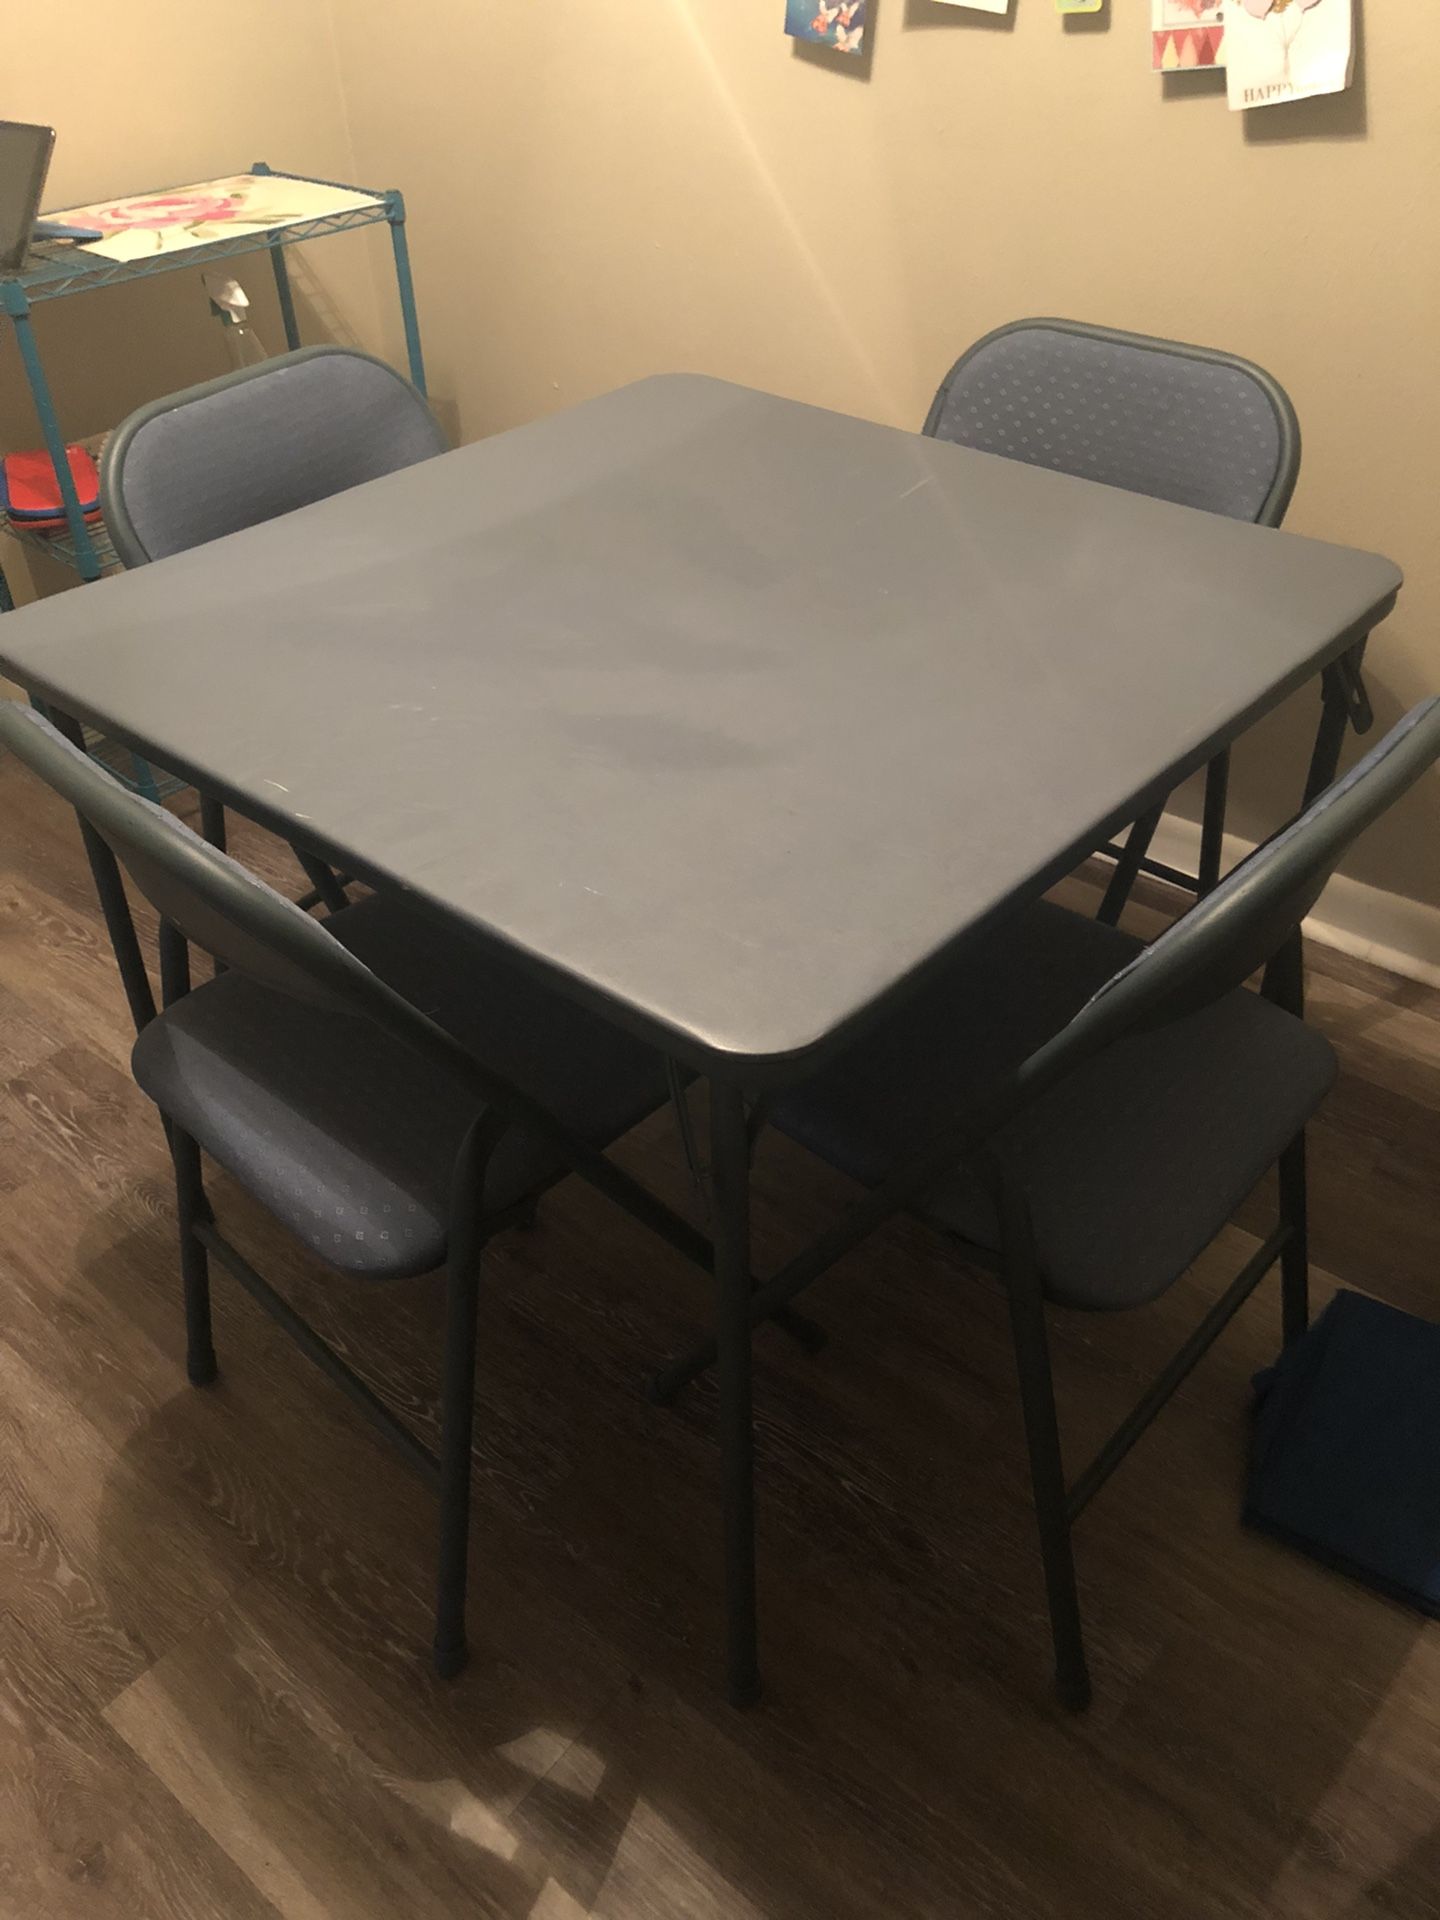 Card Table With 4 Folding Chairs